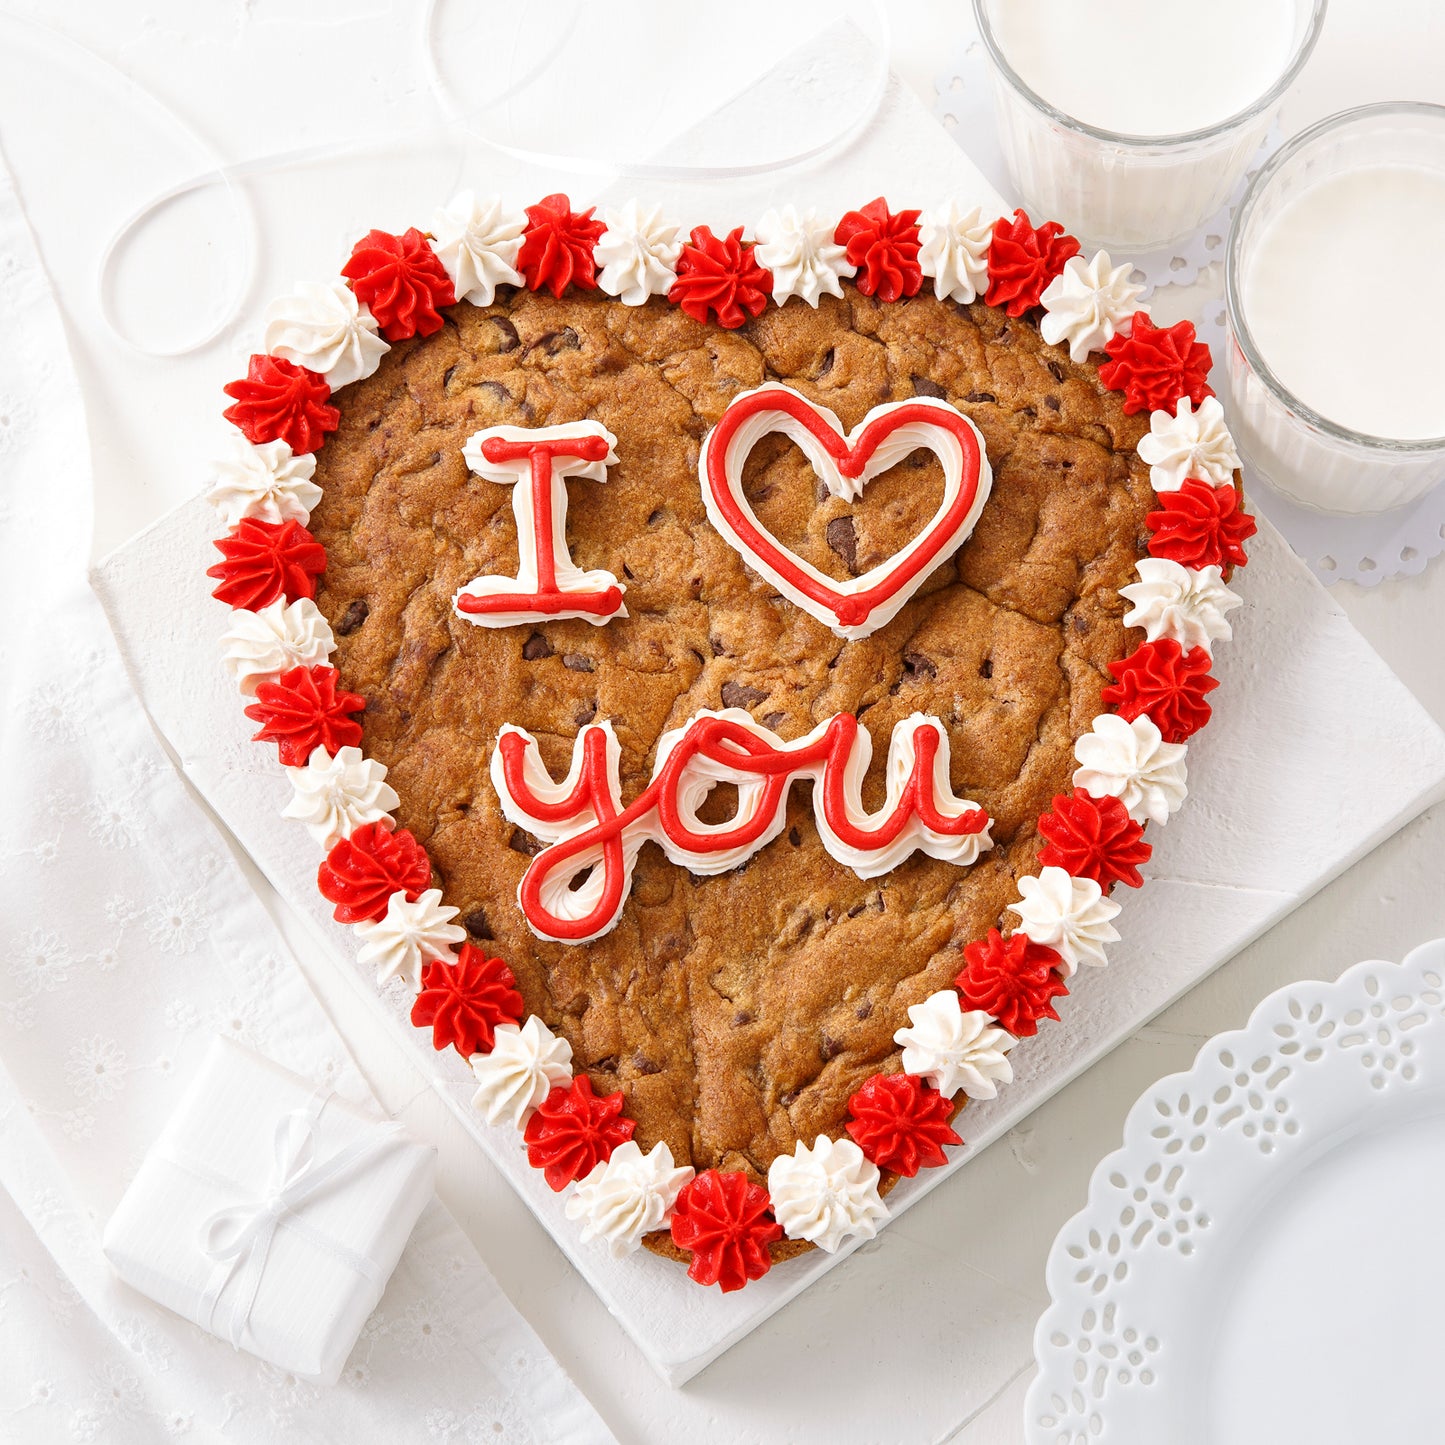 A heart-shaped cookie cake with an I Love You sentiment with red and white frosting.